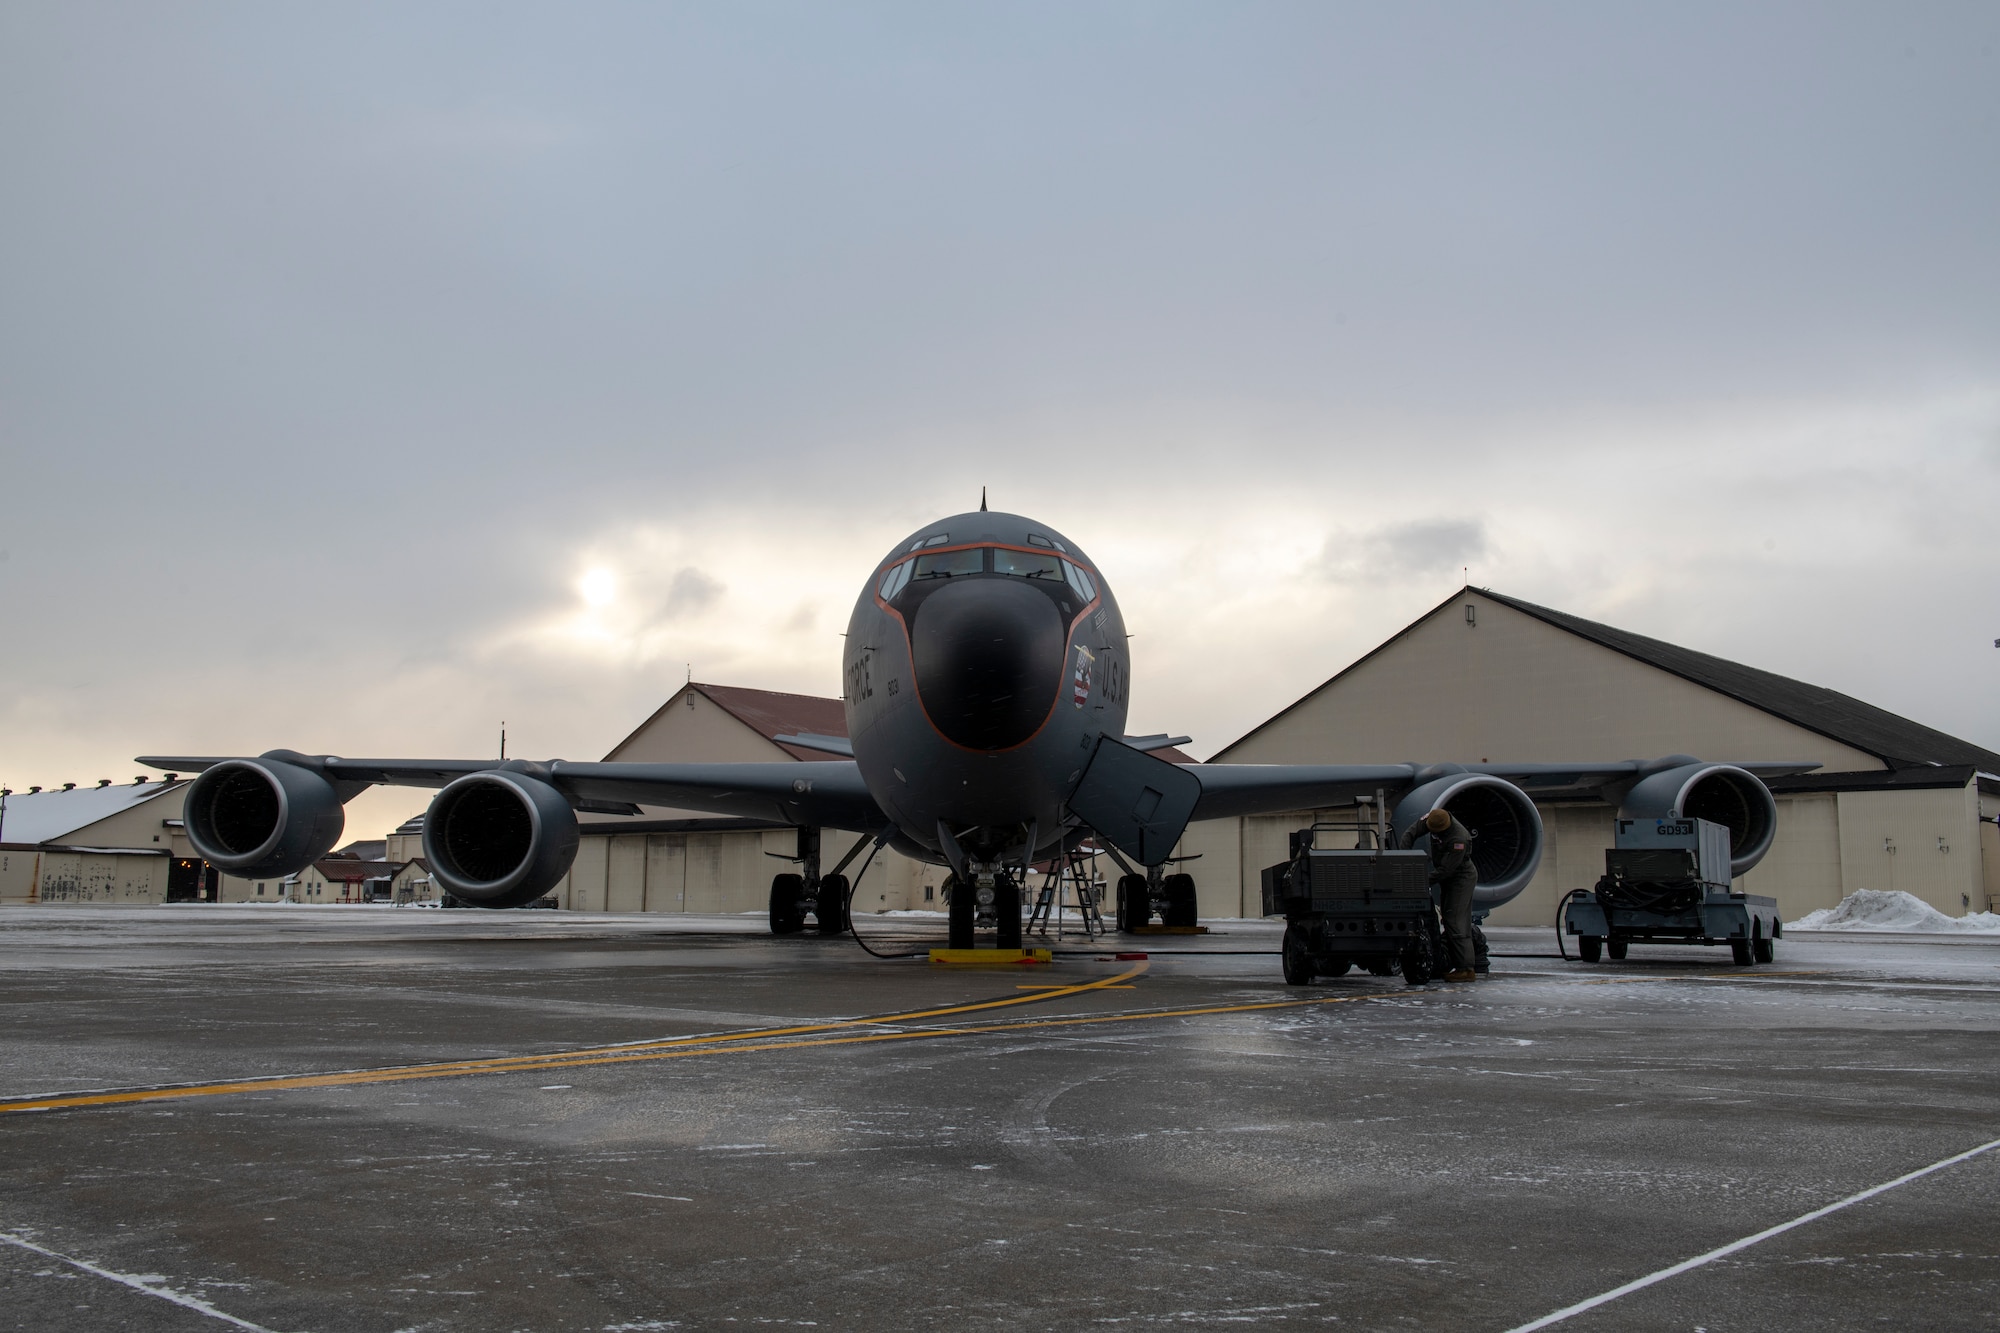 Airmen from the 909th Air Refueling Squadron conduct pre-flight inspections before departing from Misawa Air Base, Japan, Jan. 12, 2022. The 909th ARS supported a Bomber Task Force mission, with the Japan Air Self-Defense Force aircraft.(U.S. Air Force photo by Airman 1st Class Moses Taylor)